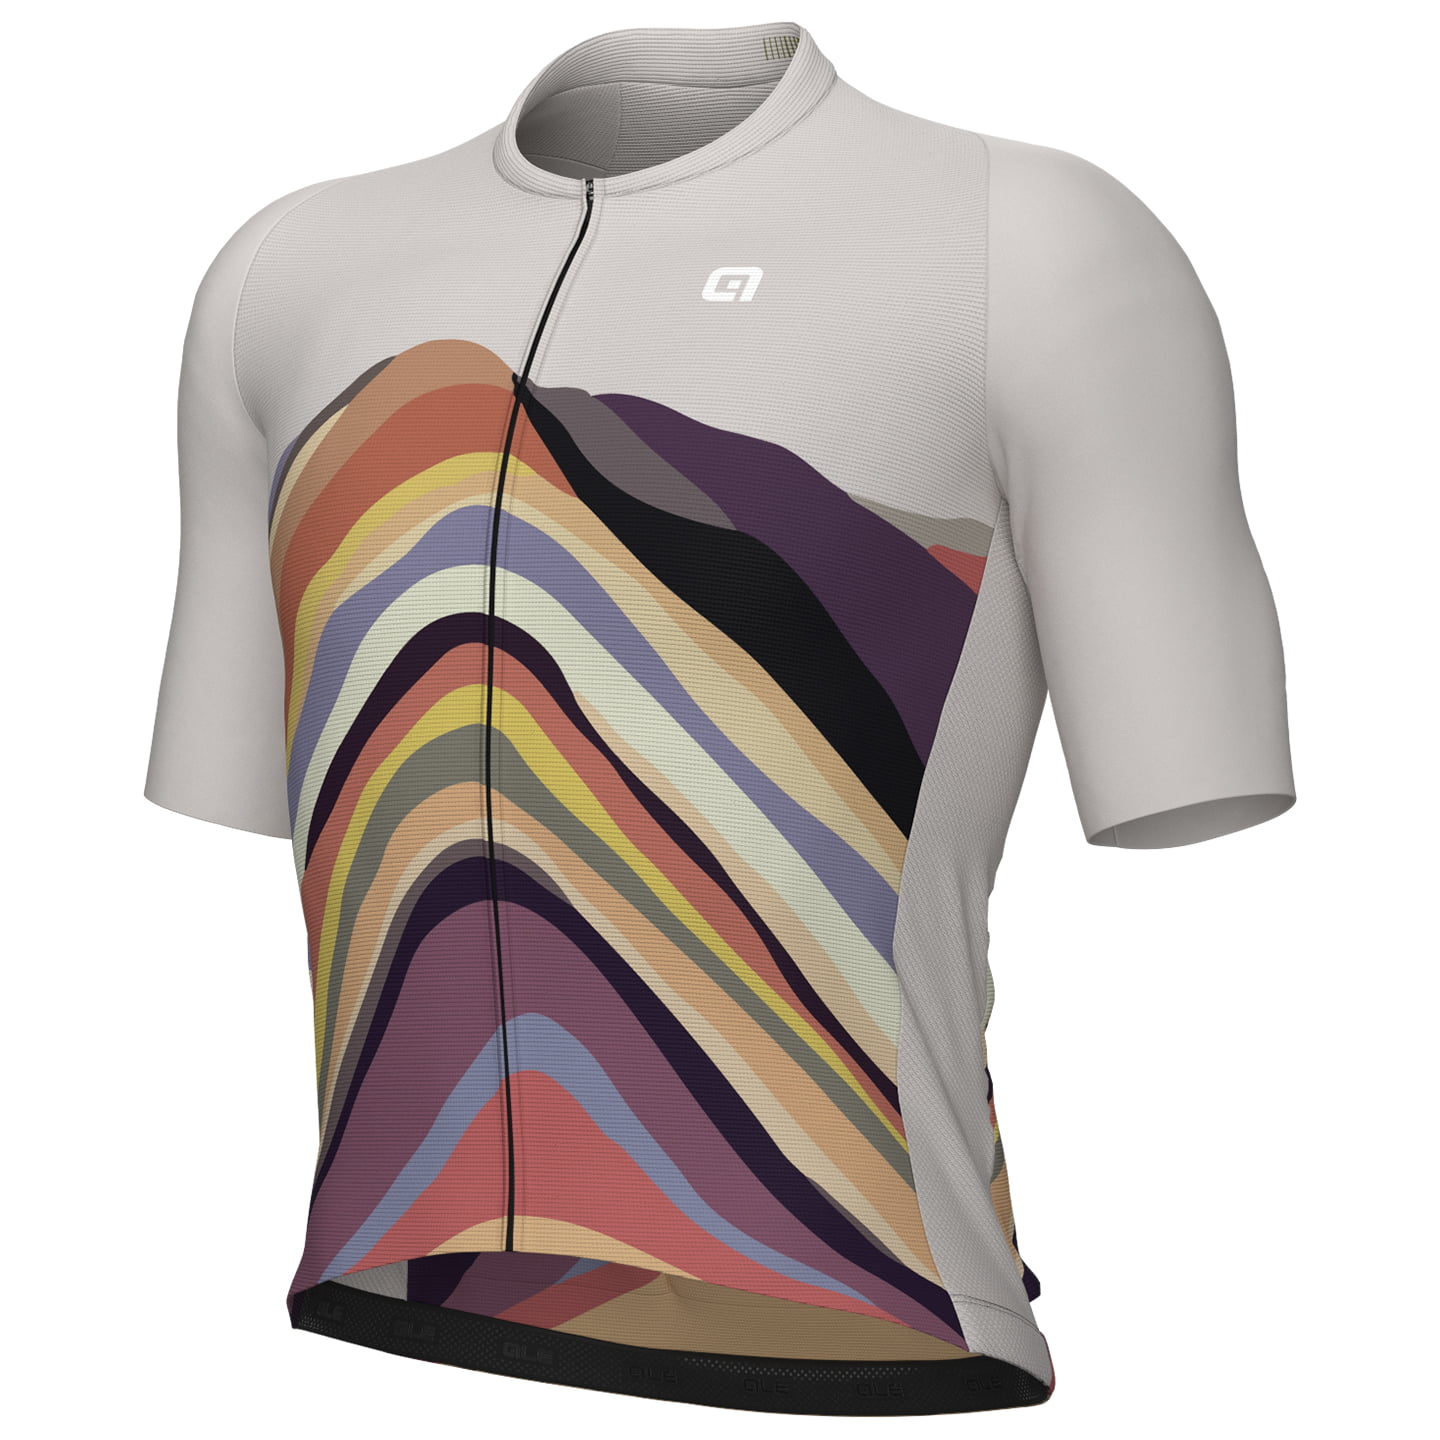 ALE Rainbow Short Sleeve Jersey, for men, size M, Cycling jersey, Cycling clothing